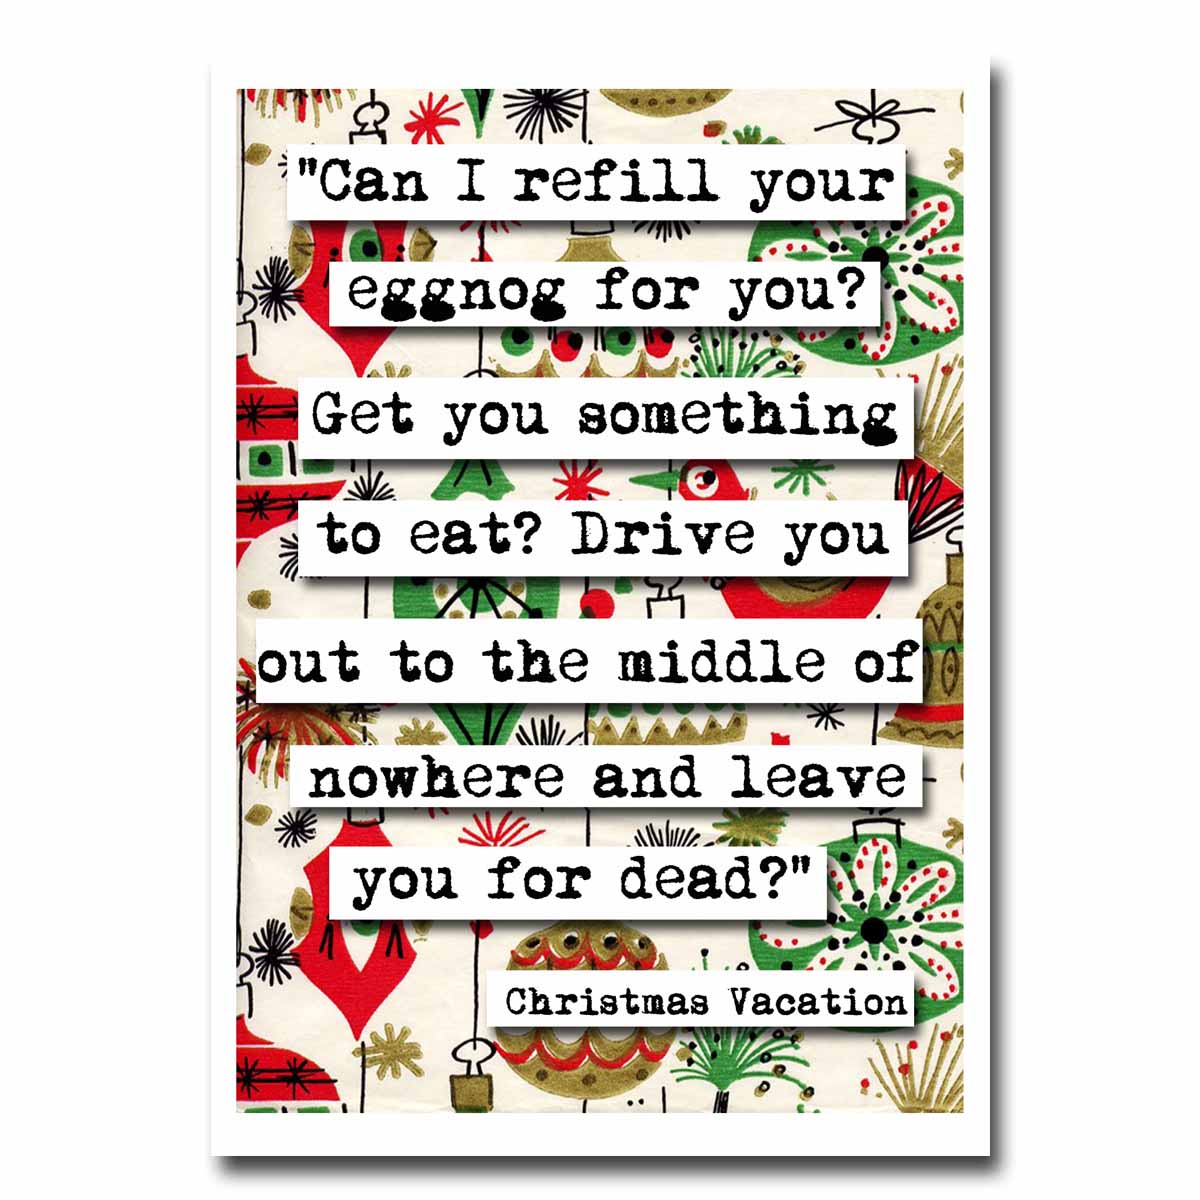 Christmas Vacation Refill Your Eggnog Quote Blank Christmas Greeting Card (14c)